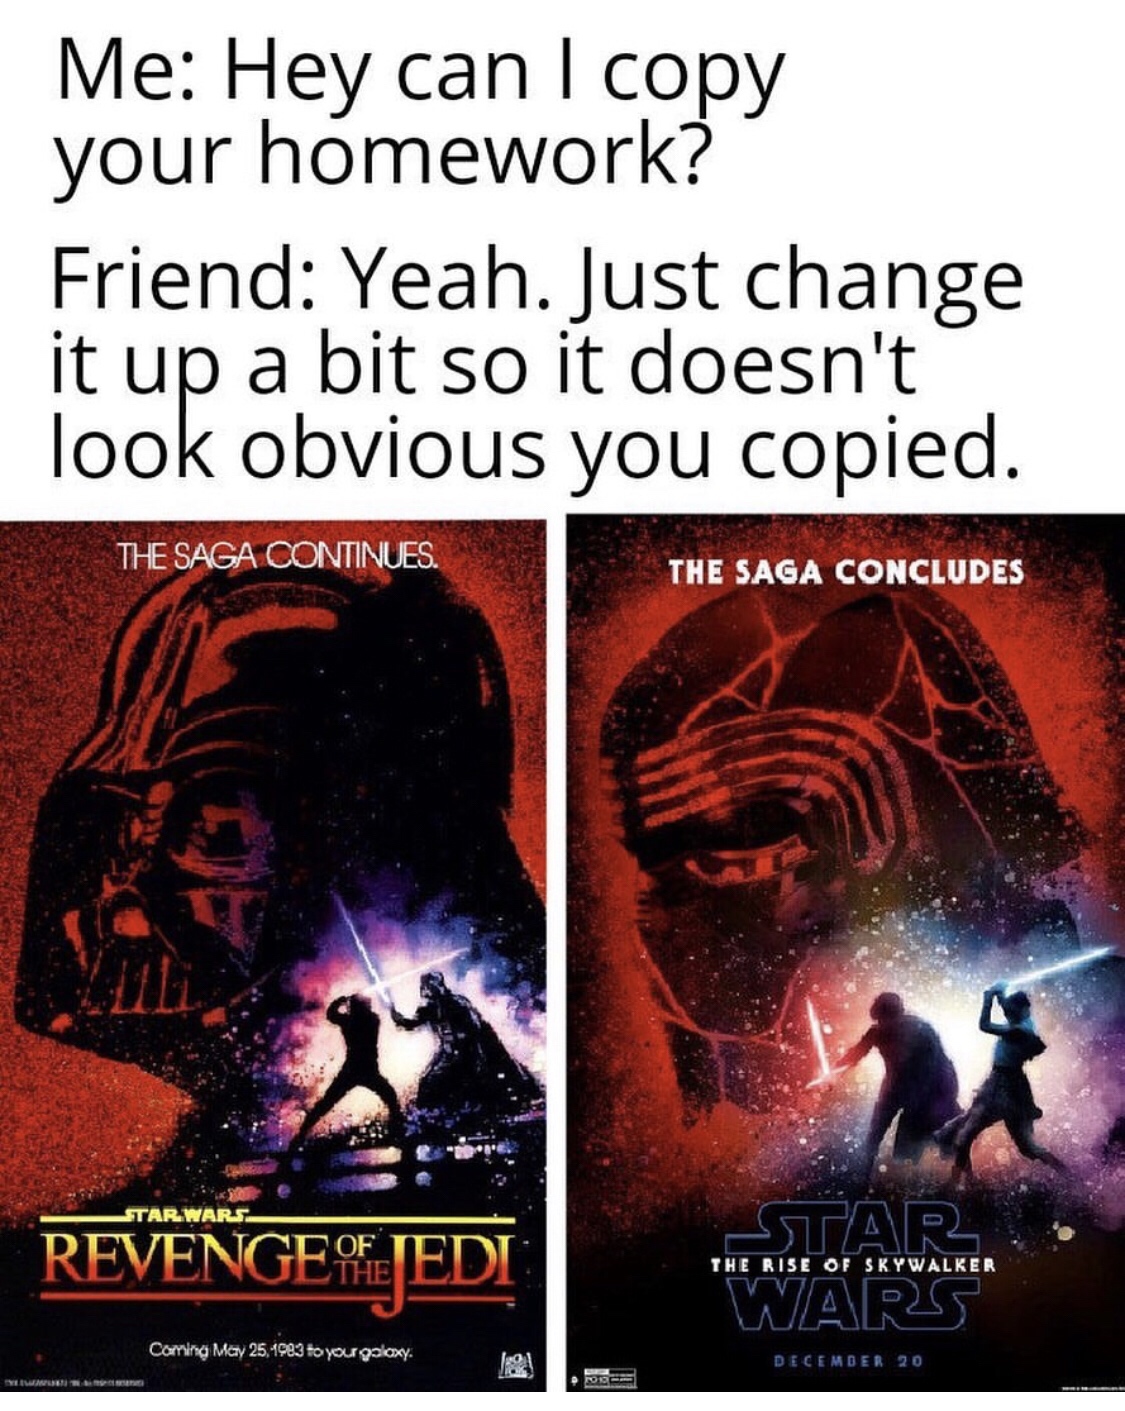 poster - Me Hey can I copy your homework? Friend Yeah. Just change it up a bit so it doesn't look obvious you copied. The Saga Continues The Saga Concludes Star Wars Revenge Of Star Wars Tee Rise Of Seywaleta Corgi 1989 De Eerste 10